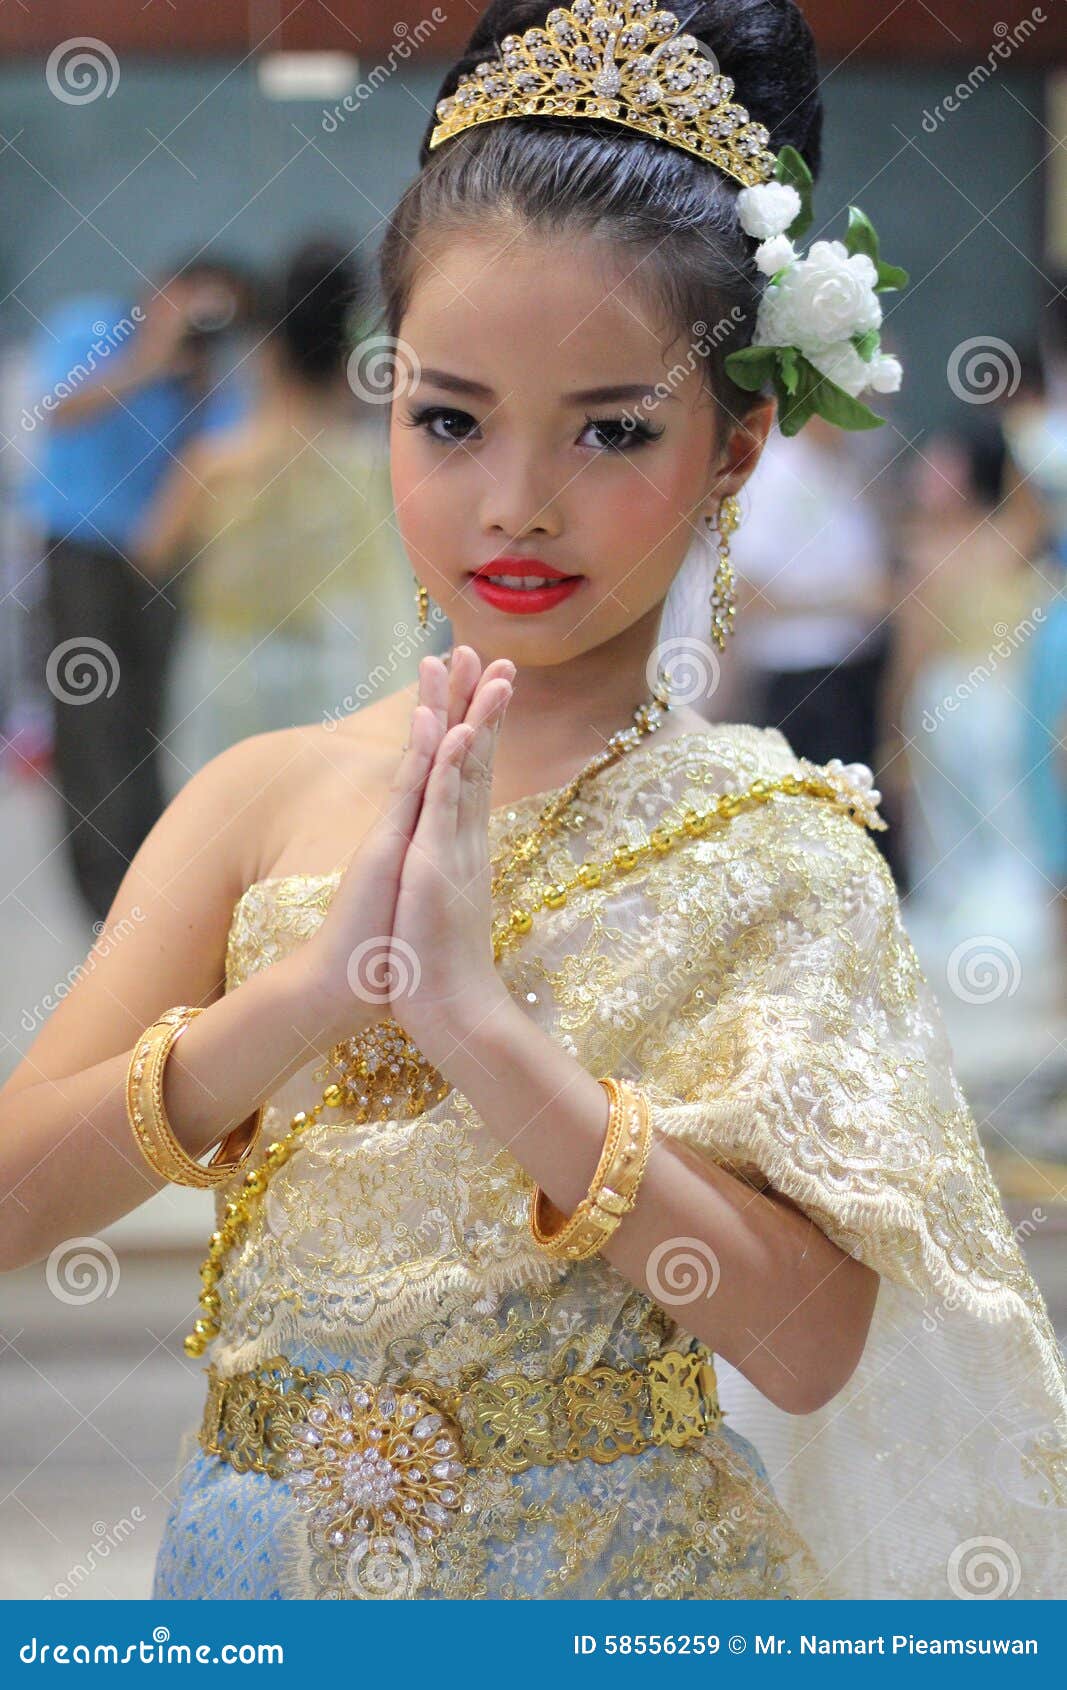 Children Thailand Students Culture Dance Editorial Stock Image - Image ...